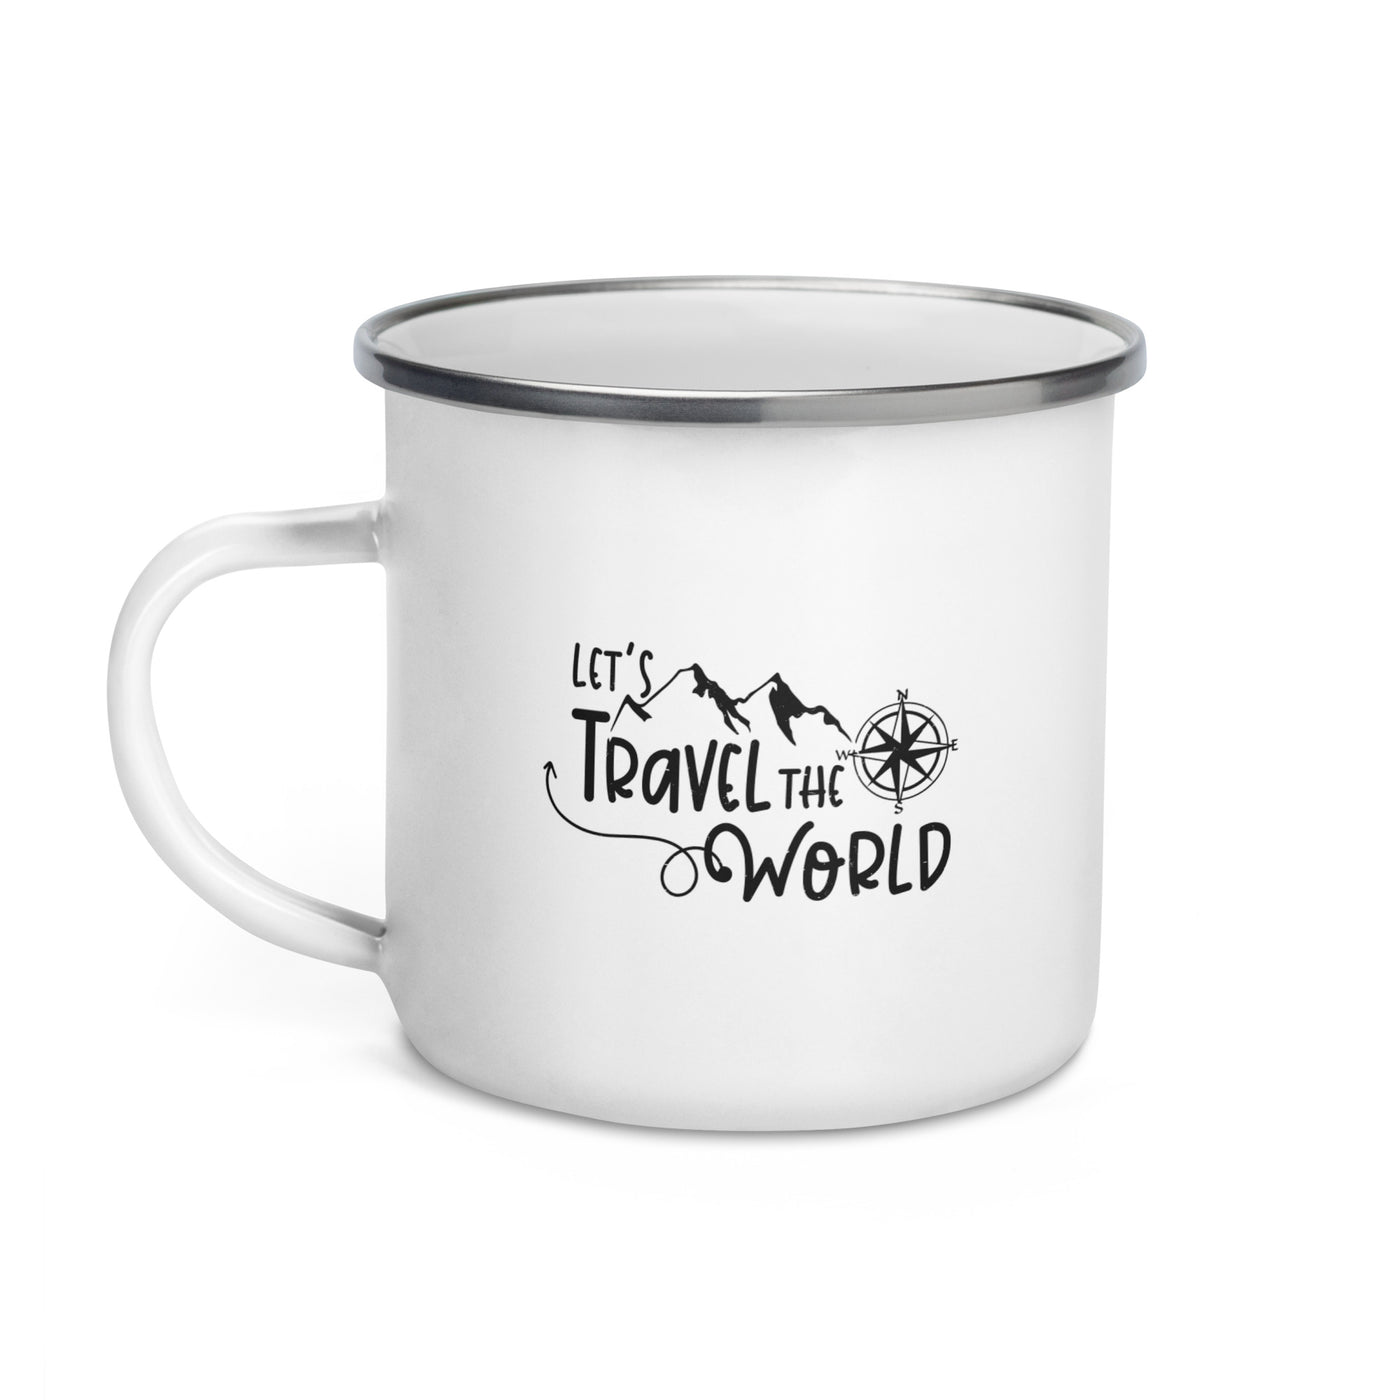 Lets Travel The World - Emaille Tasse camping wandern